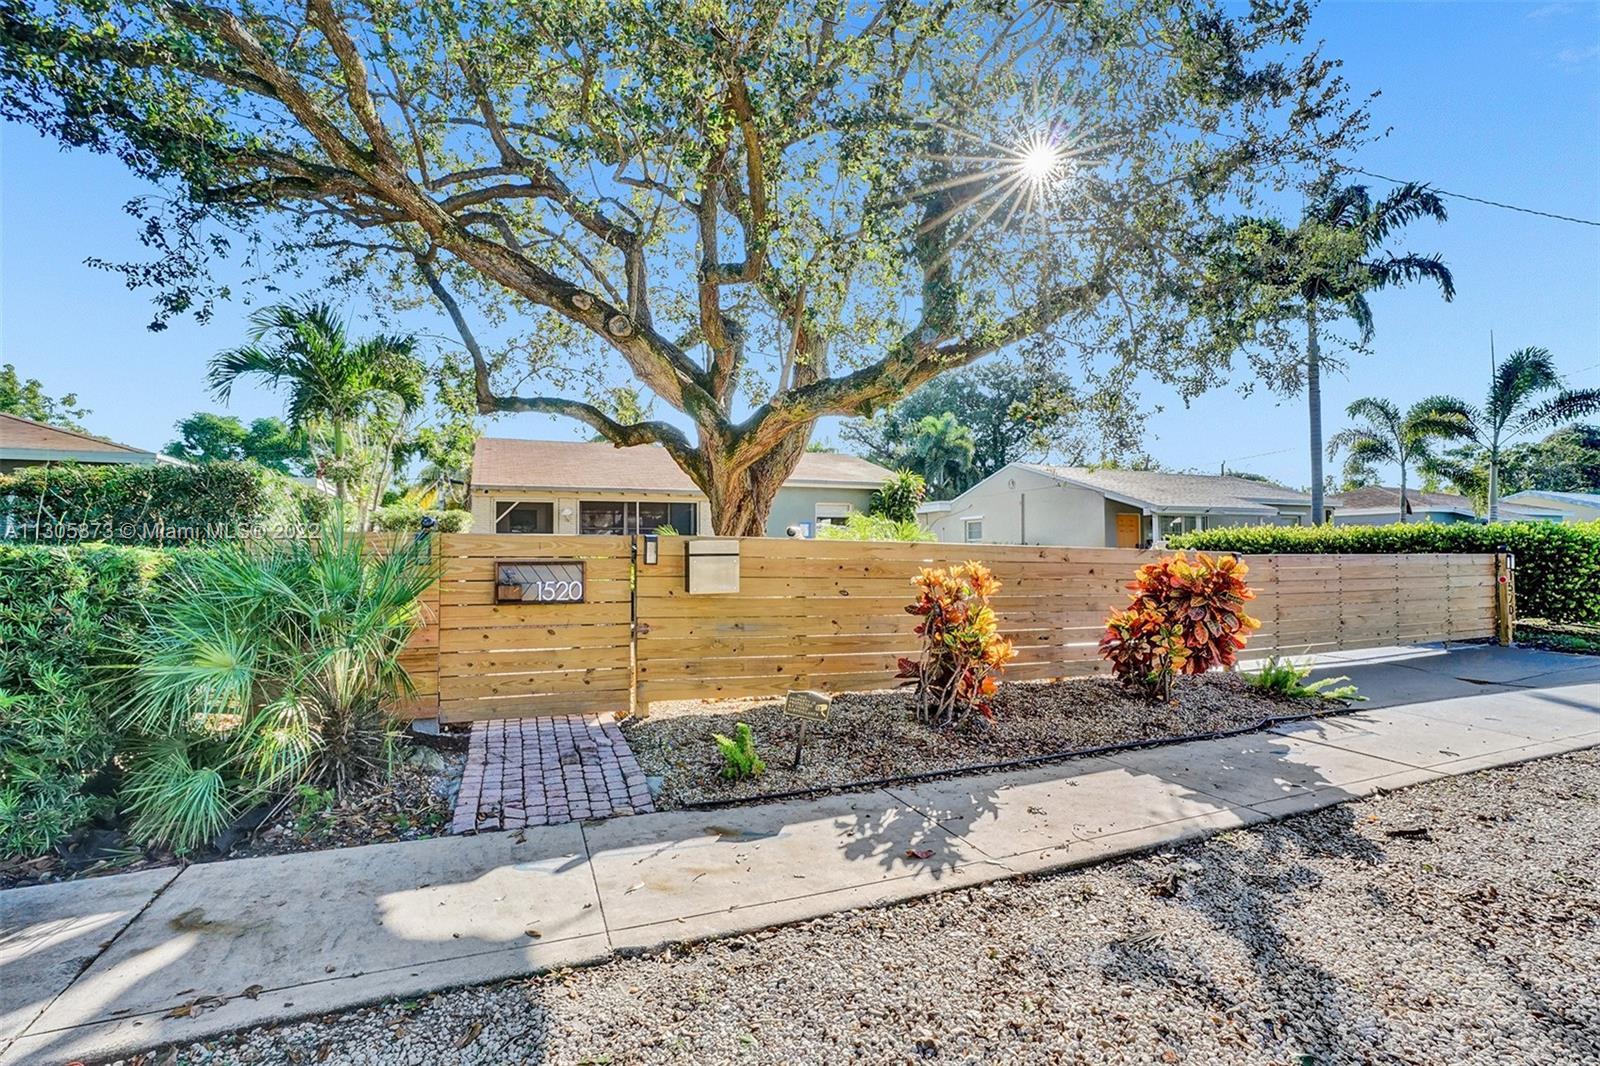 A DIAMOND IN THE ROUGH. Rare SPLIT-single-family home on 1 single lot. Enjoy a 2/2 up front and a LA